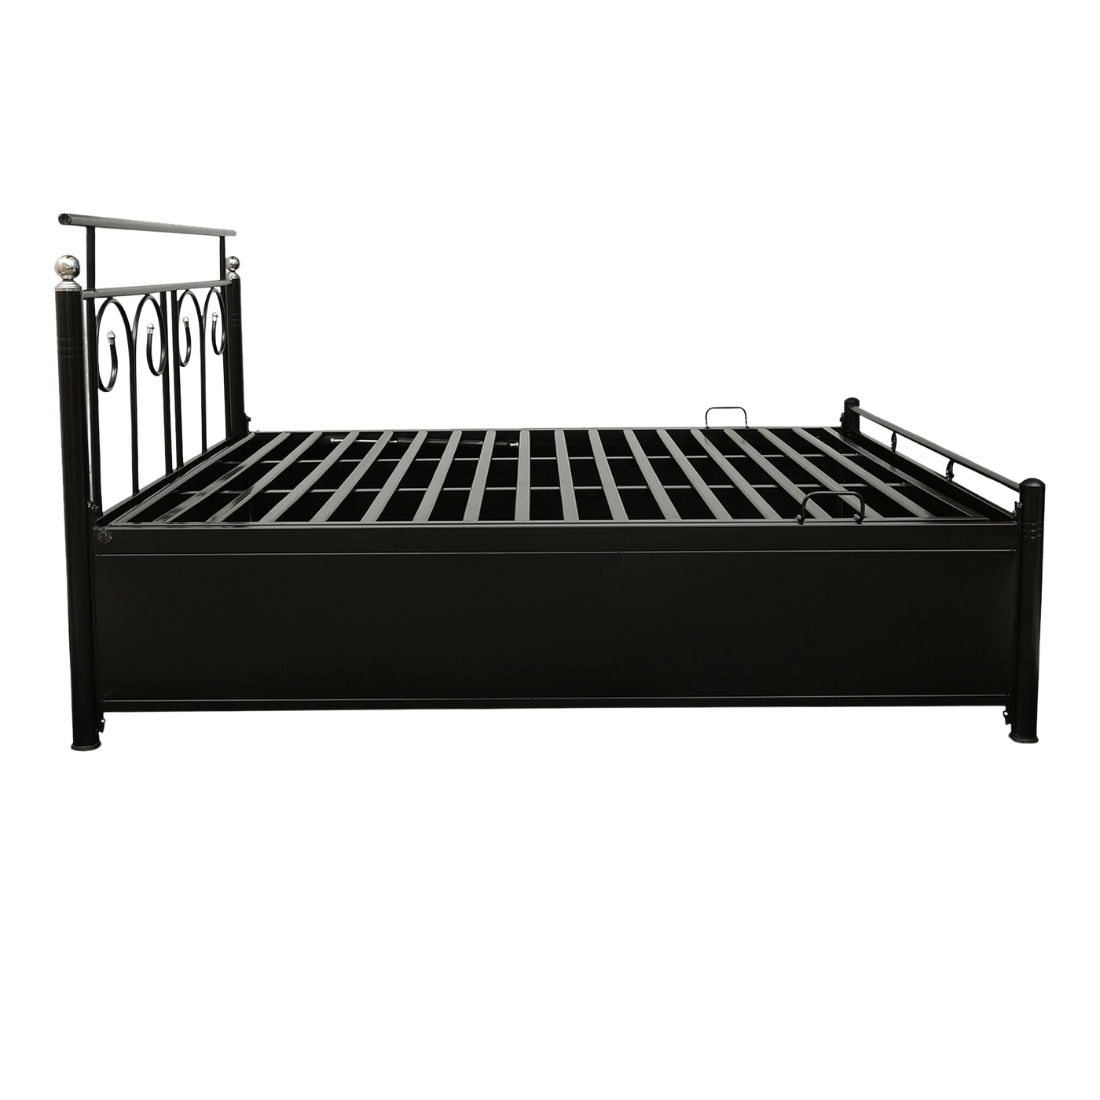 Colin Hydraulic Storage King Metal Bed (Color - Black) with Designer Headrest